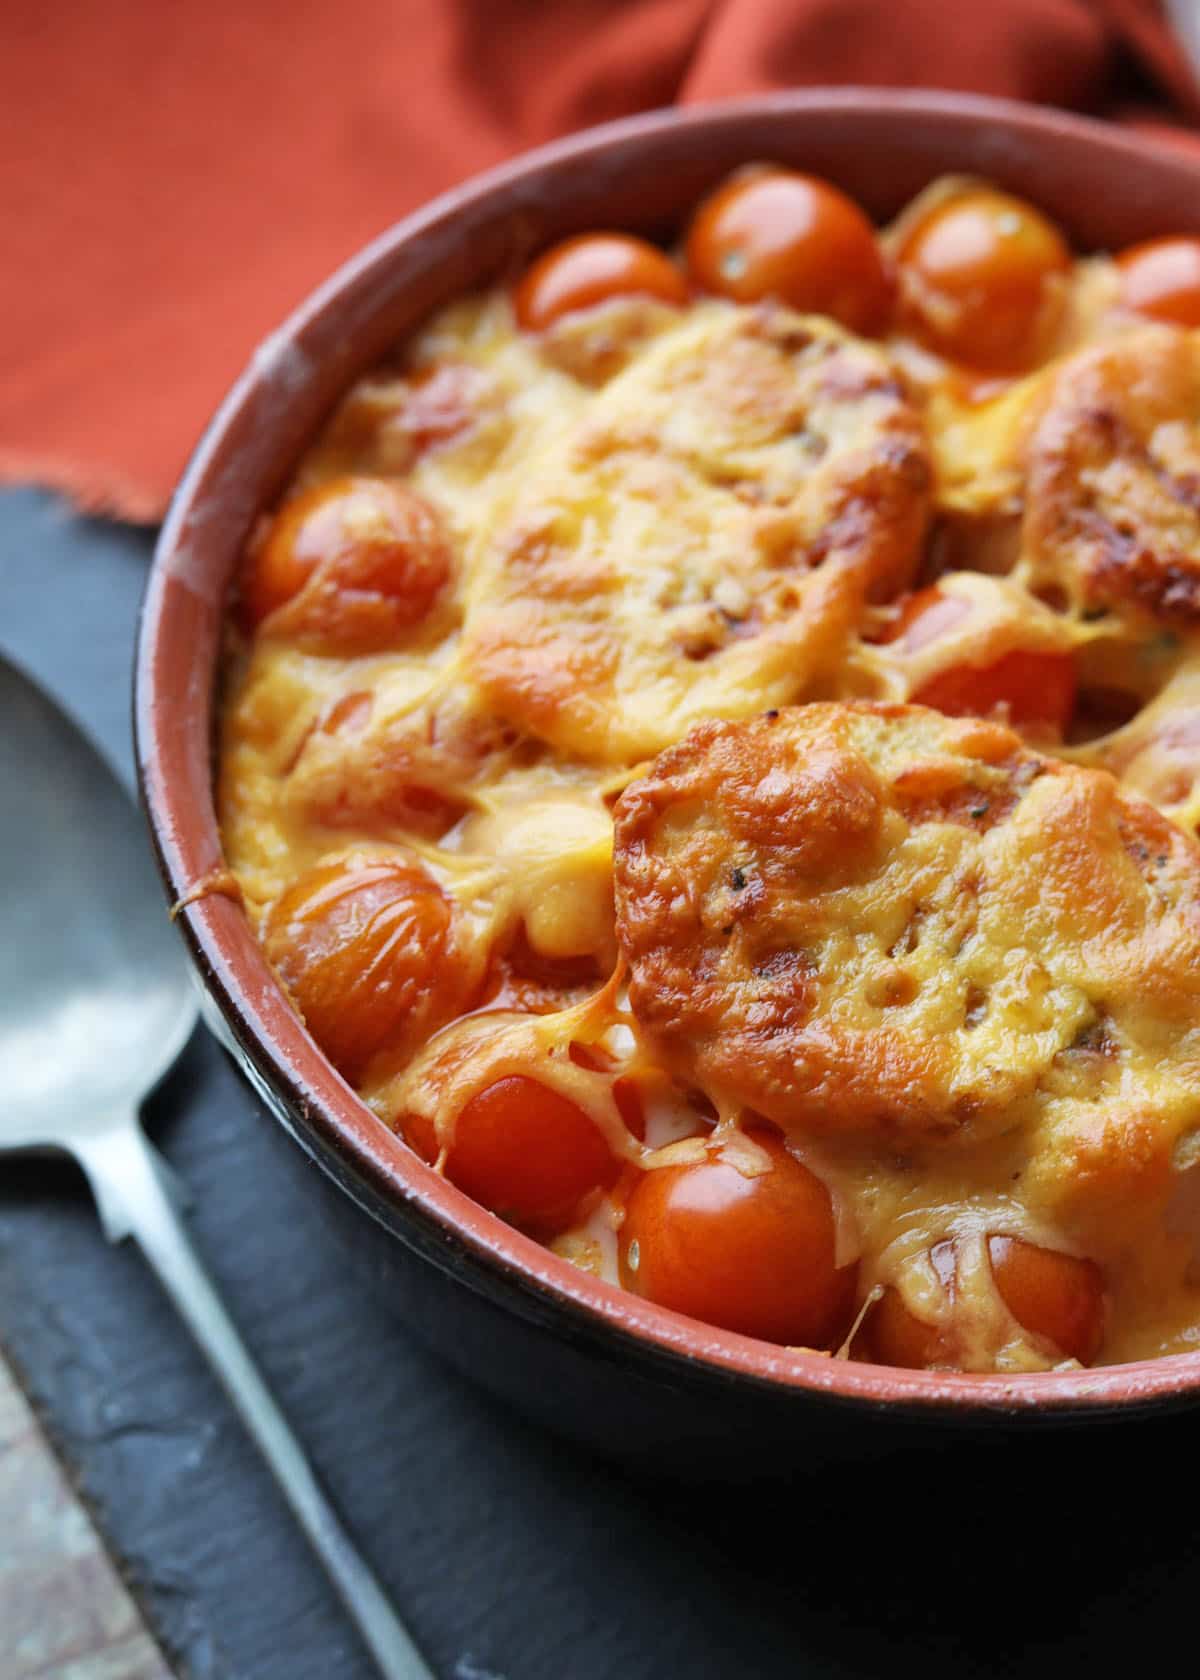 Garlic Bread and Tomato Bake in serving dish with spoon